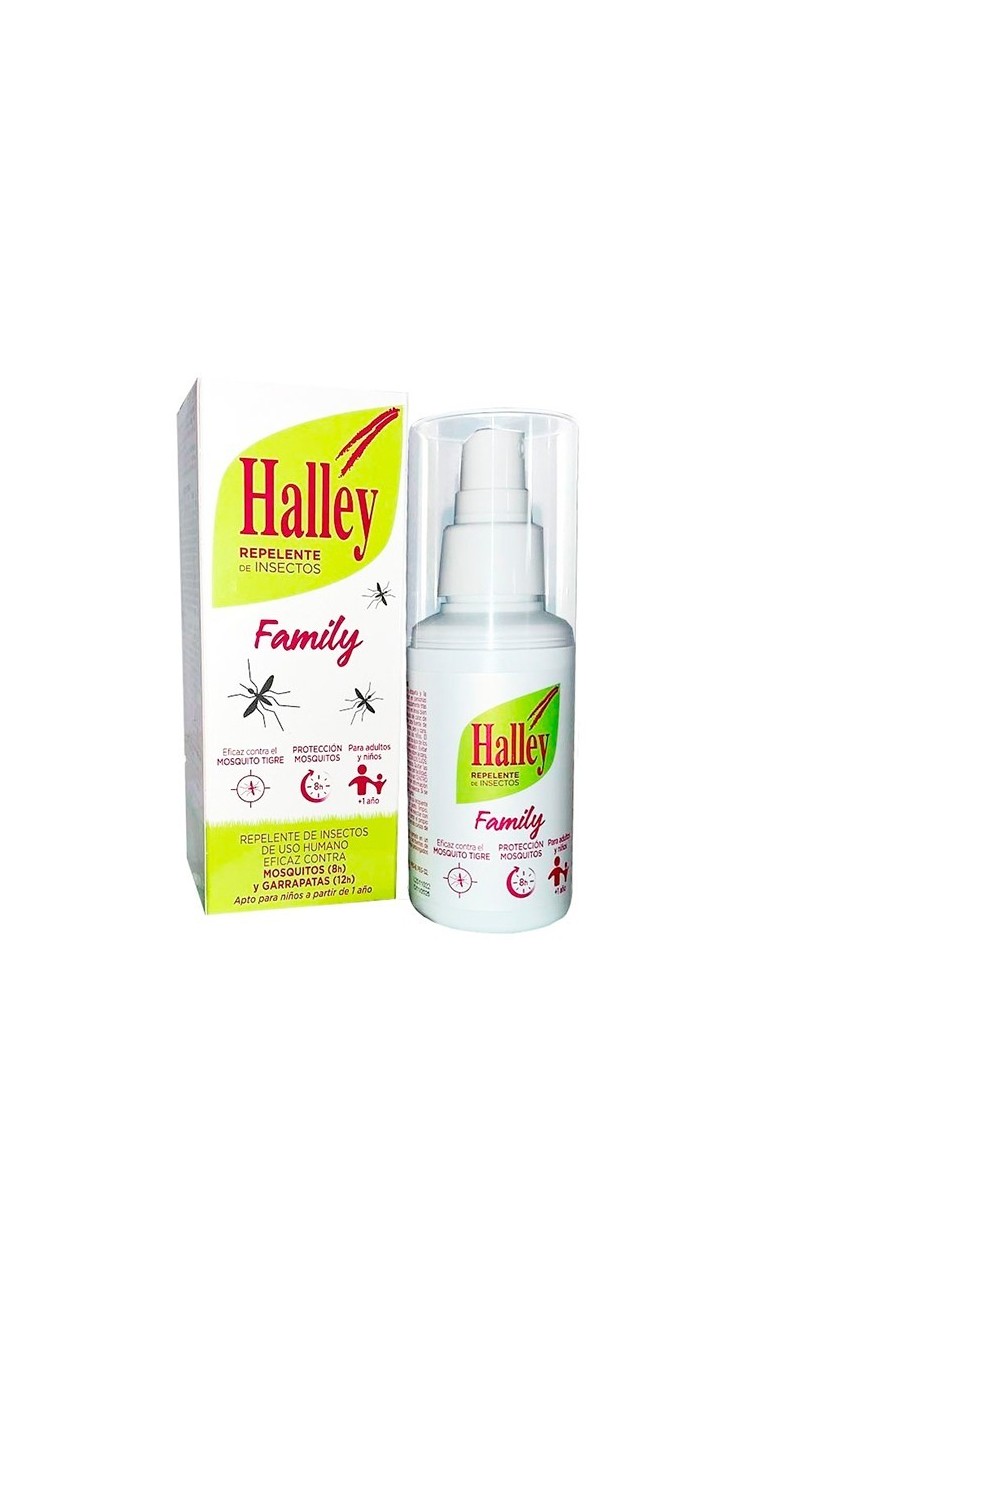 Halley Family Insect Repellent 200ml